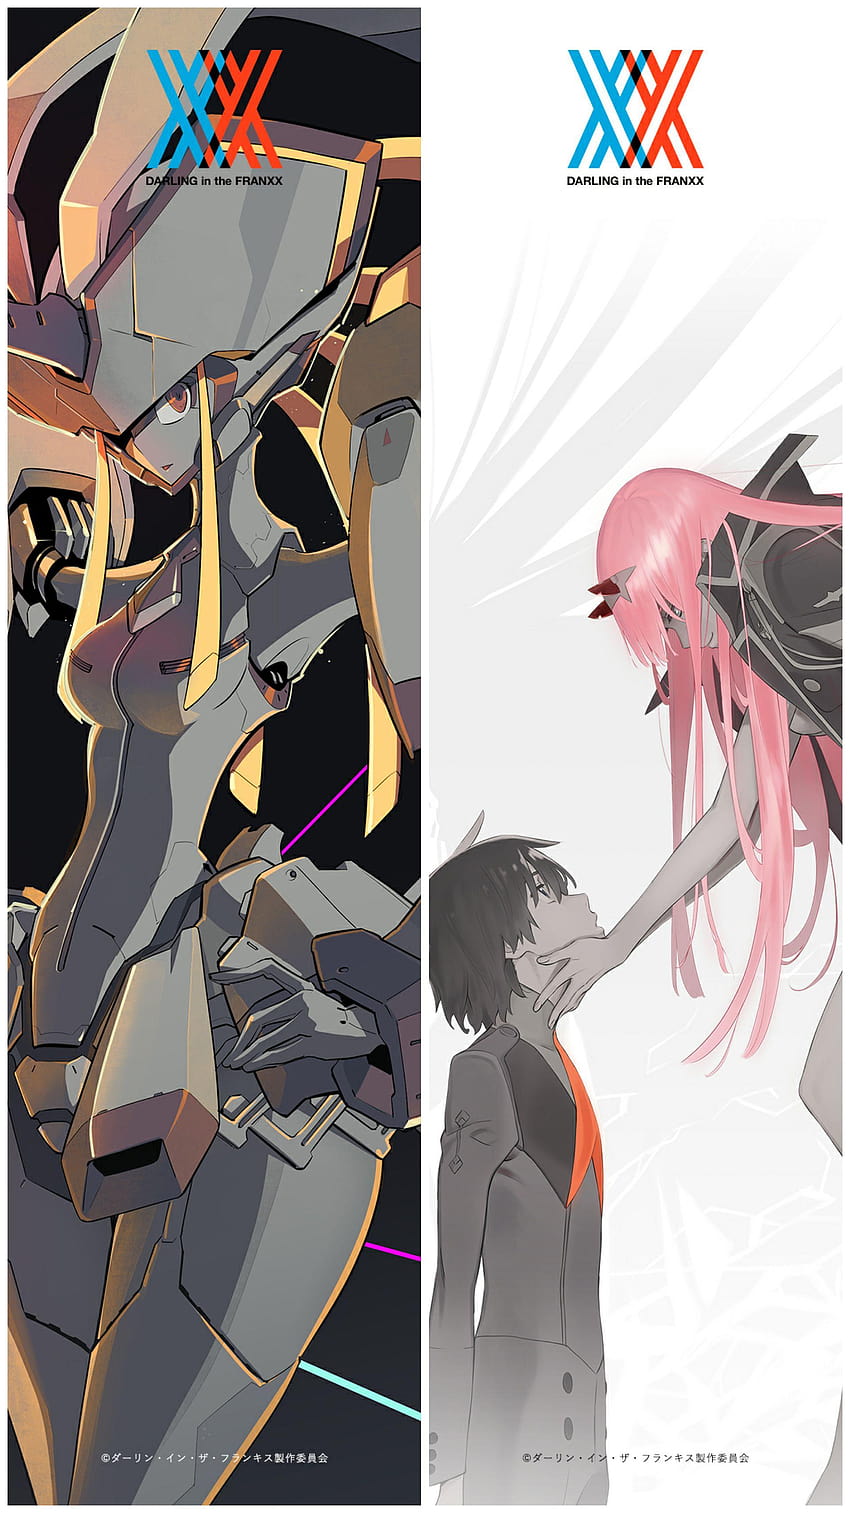 Made a Darling In The Franxx phone for anyone who wants HD phone wallpaper